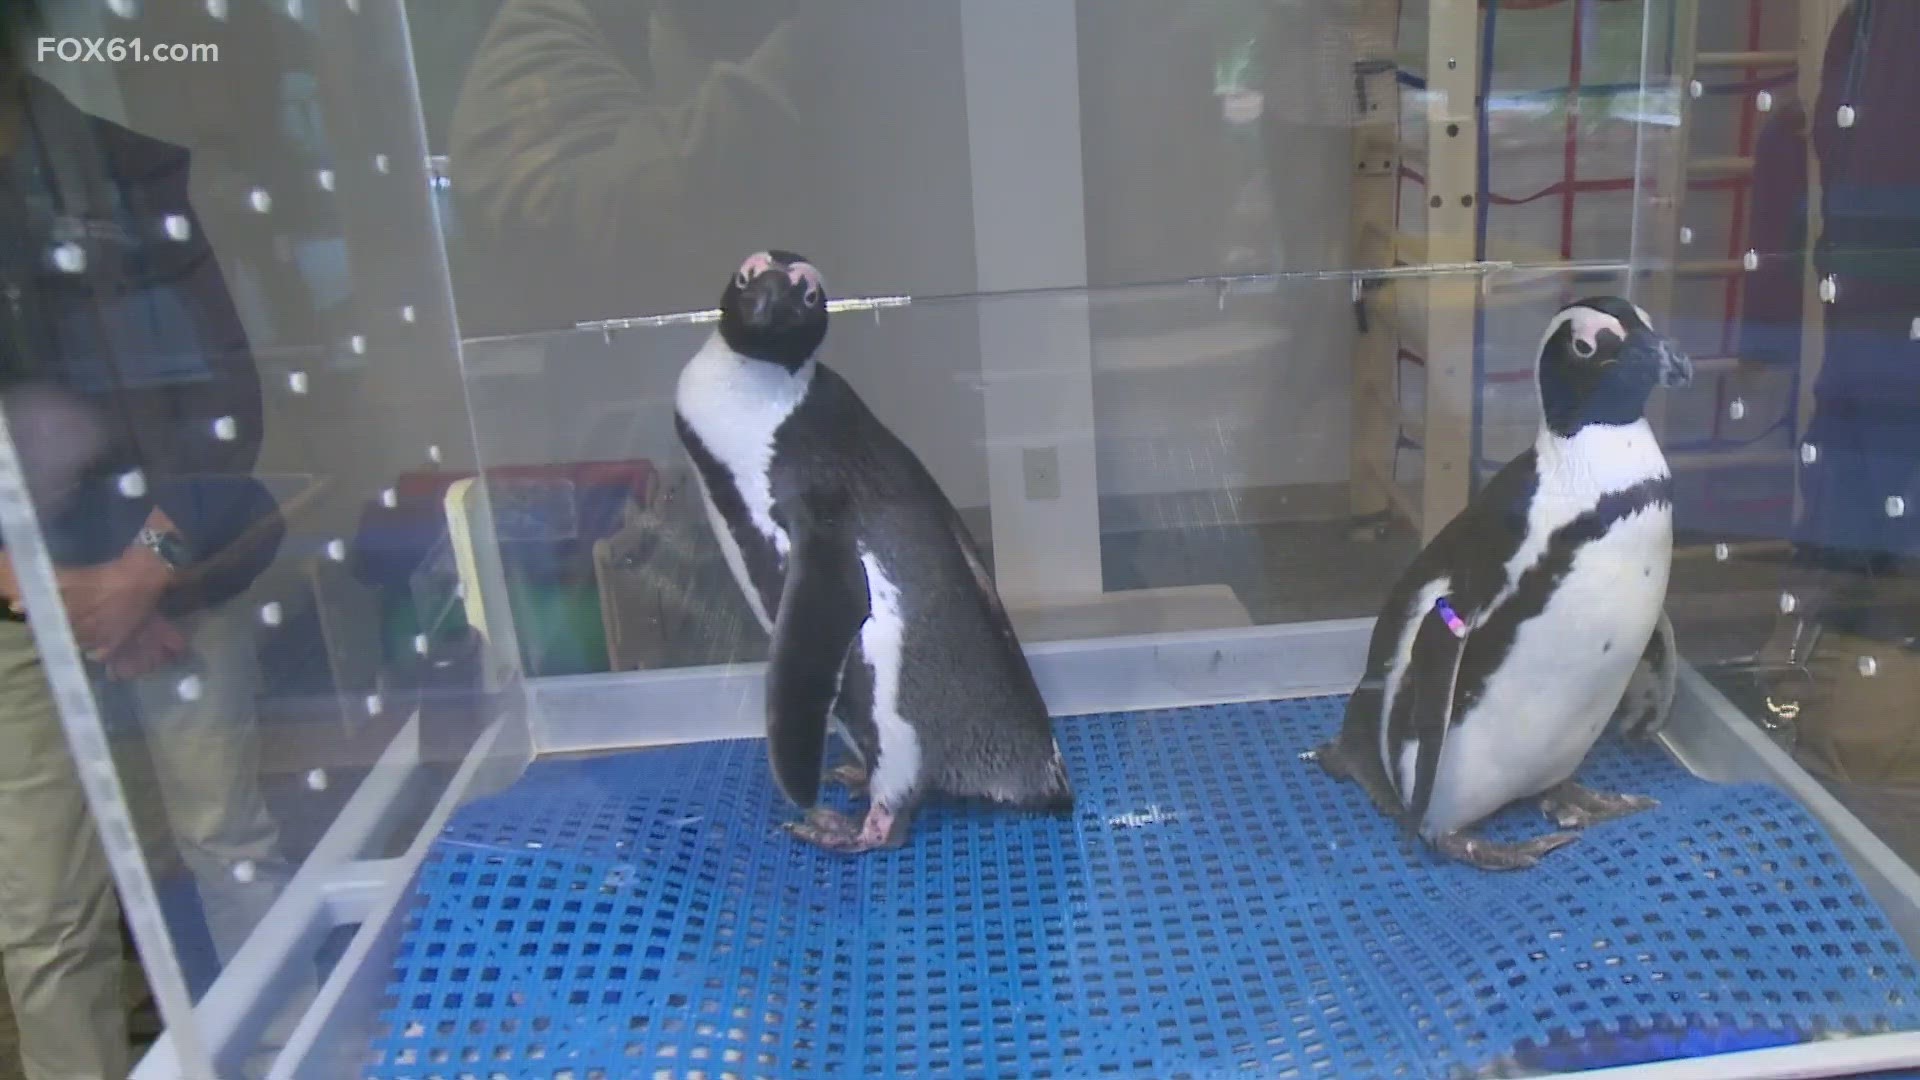 The animals at Mystic Aquarium have been trained to be able to paint, and the kids who received these gifts had big smiles after getting them.